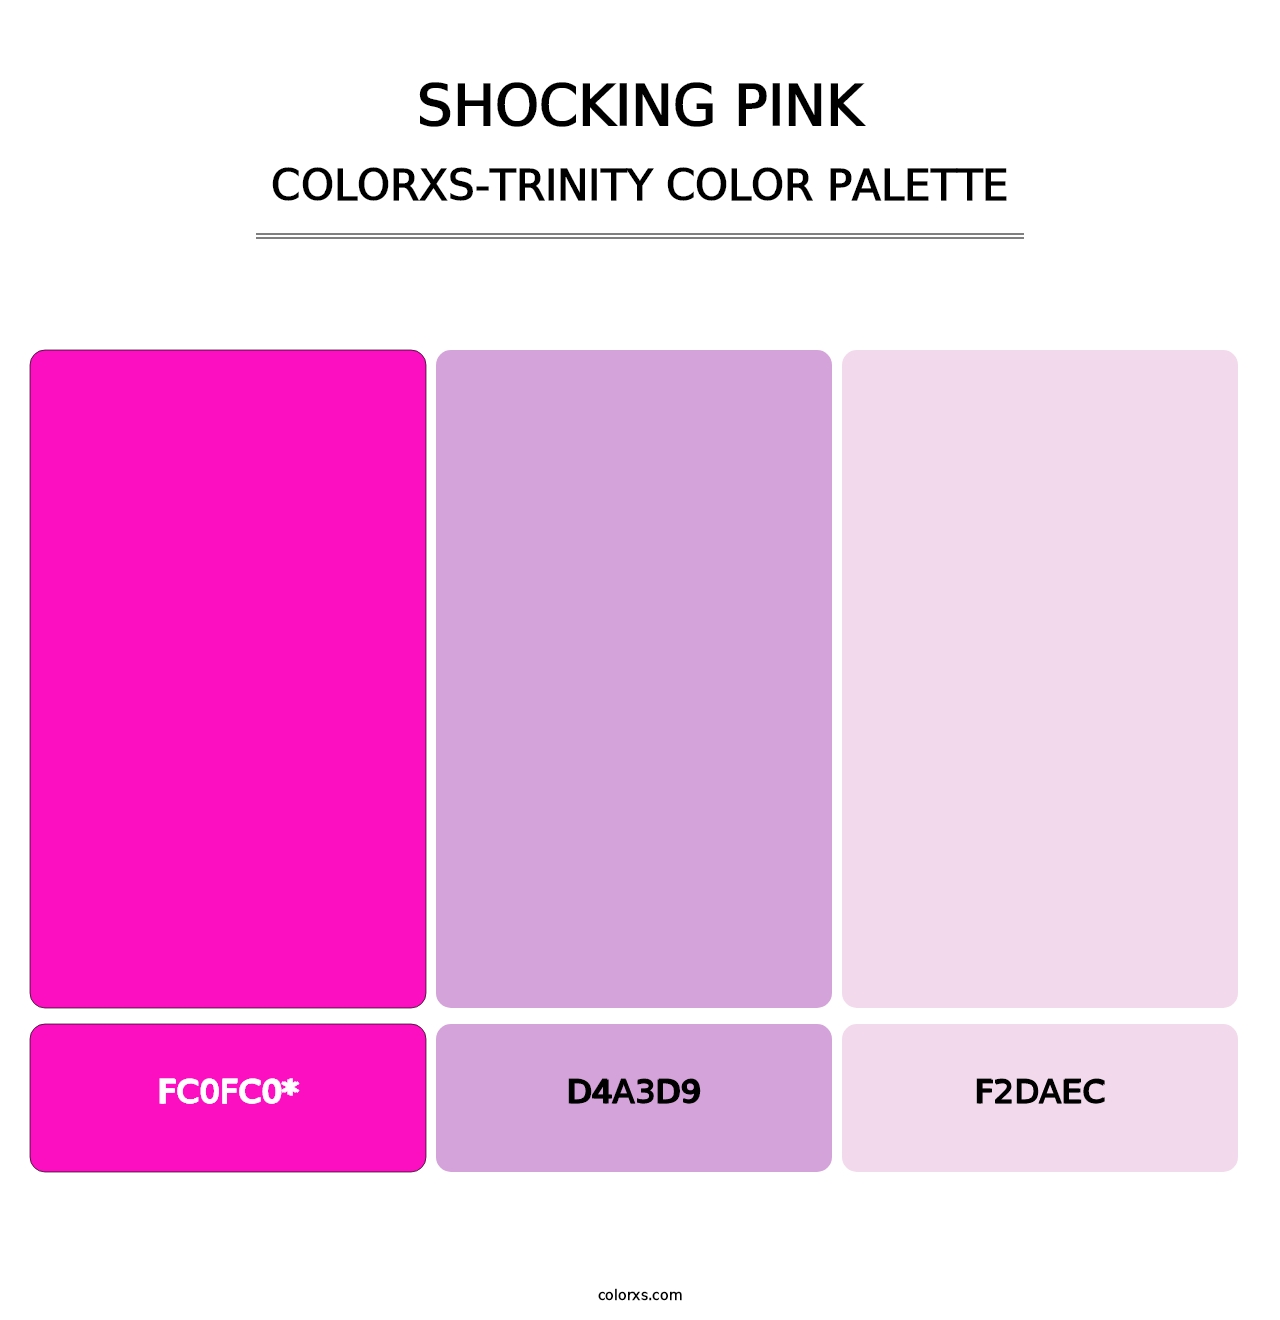 Shocking Pink - Colorxs Trinity Palette